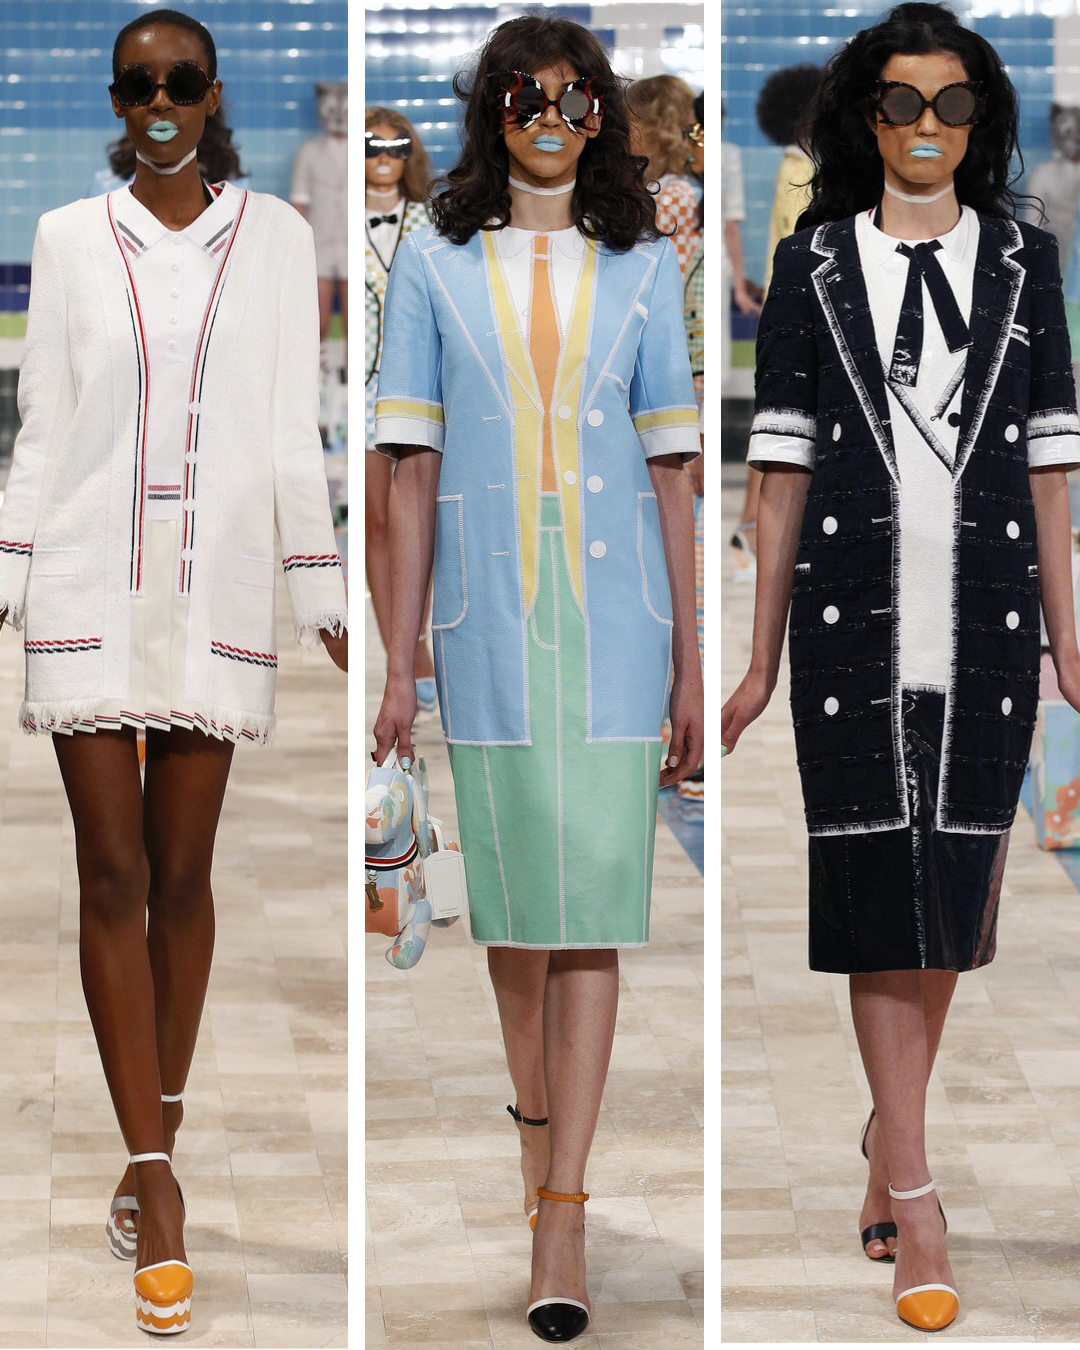 Thom Browne Spring 2017 ready to wear collection at NYFW 2016